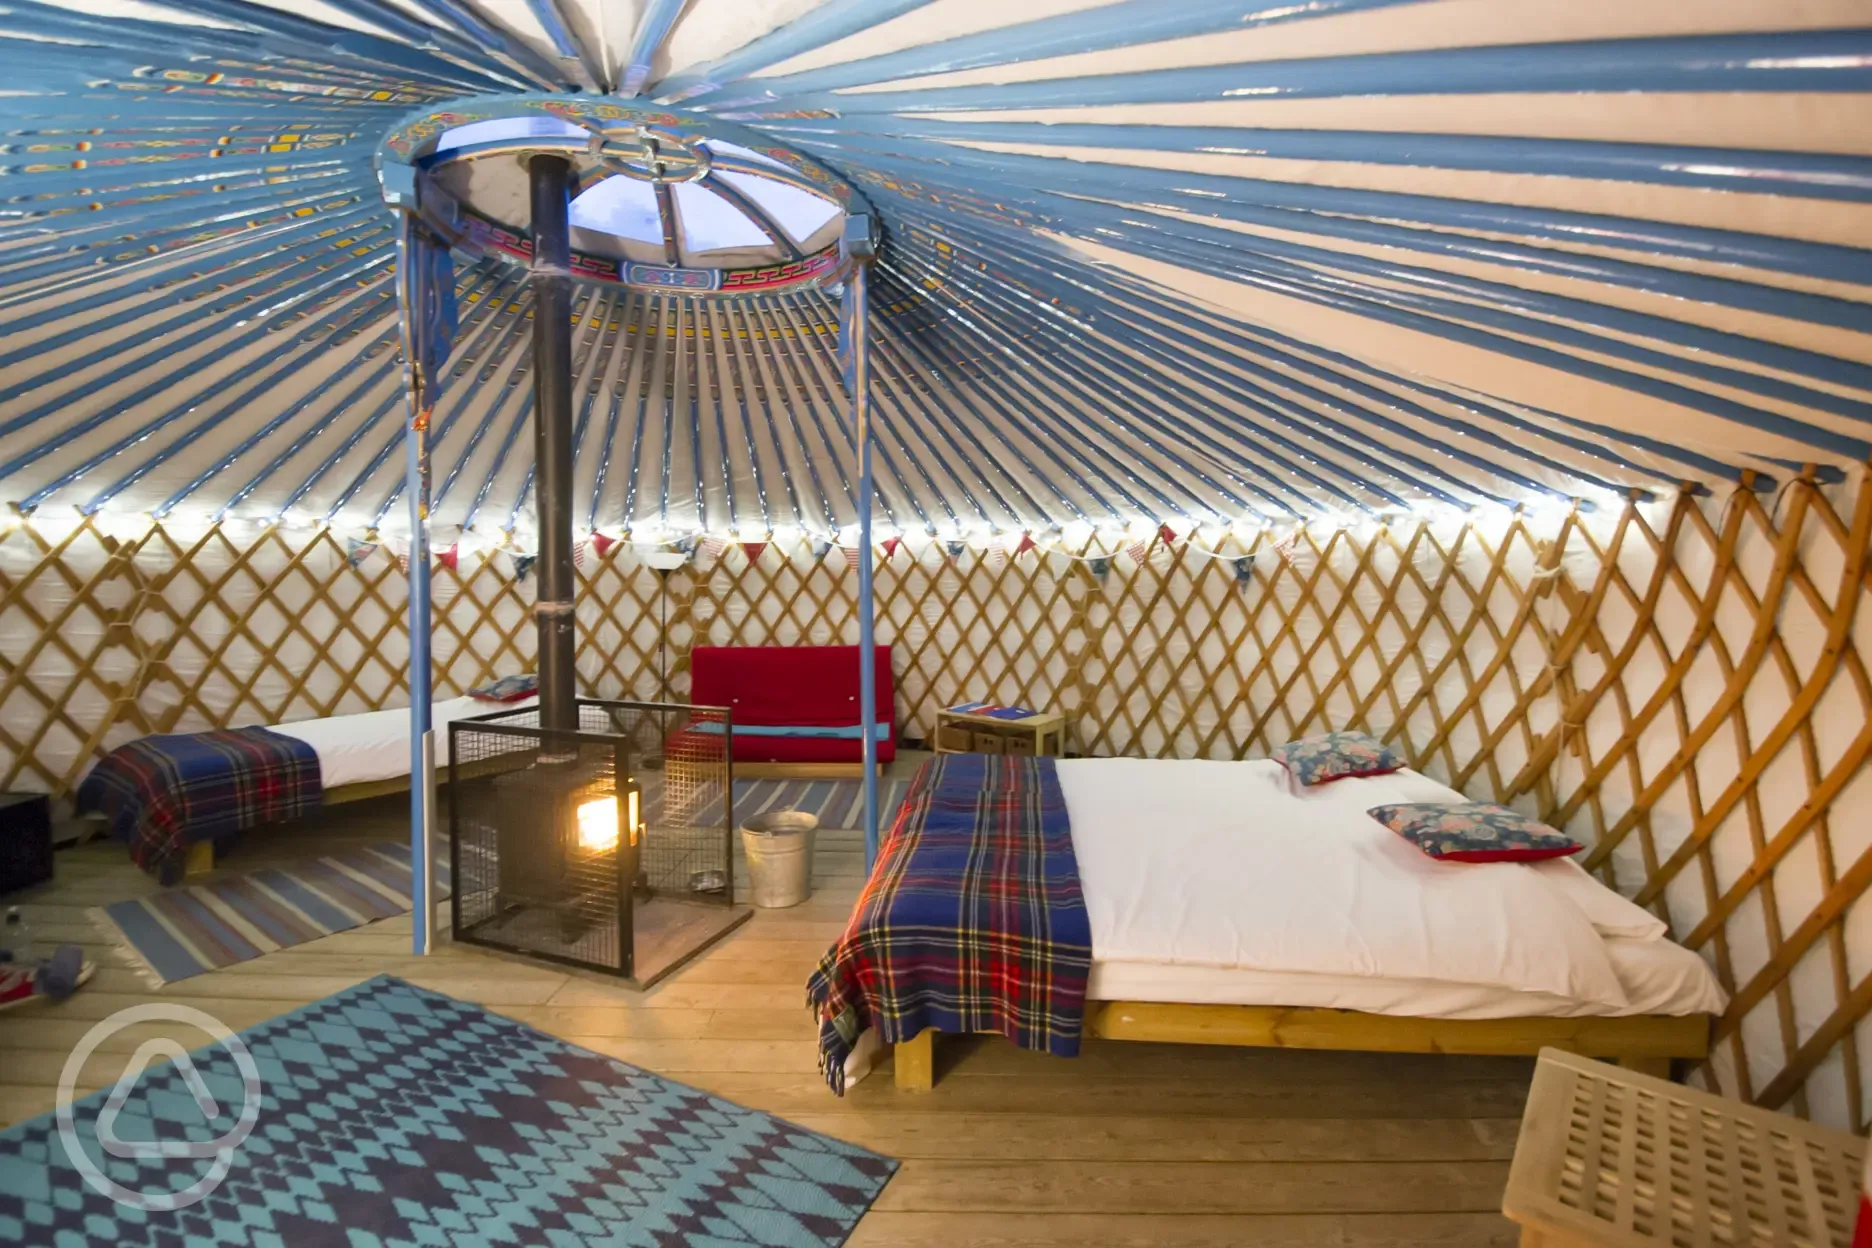 Inside our yurts